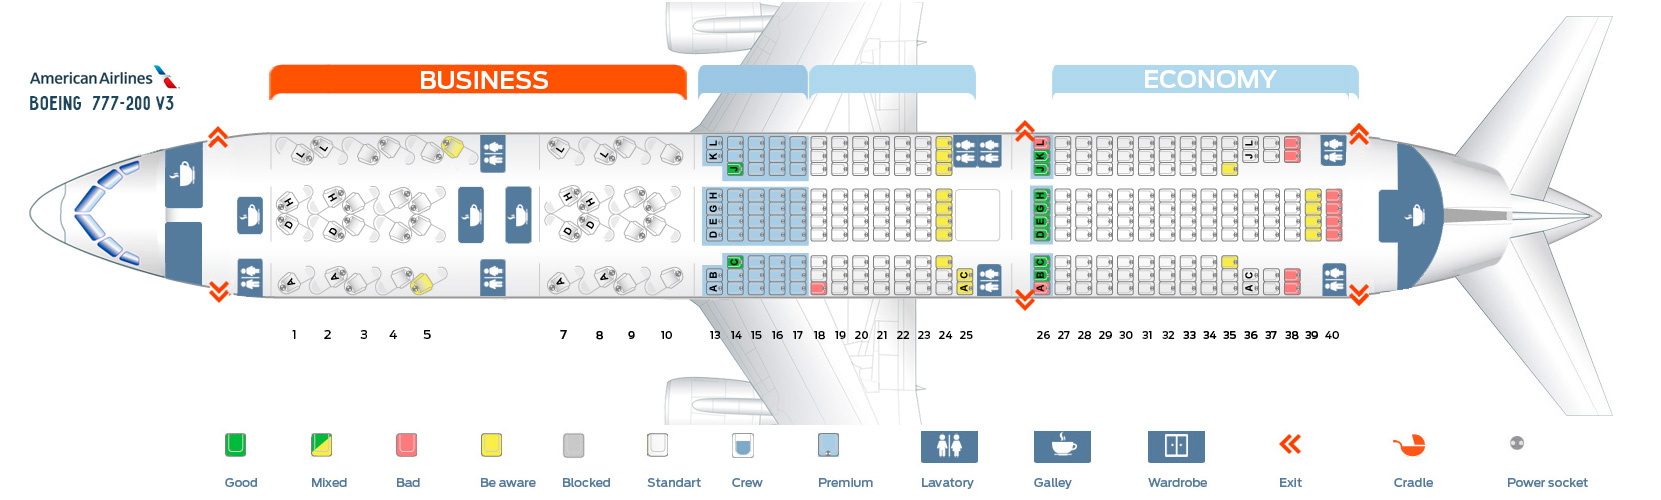 Seat map Boeing 777-200 American Airlines. Best seats in the plane